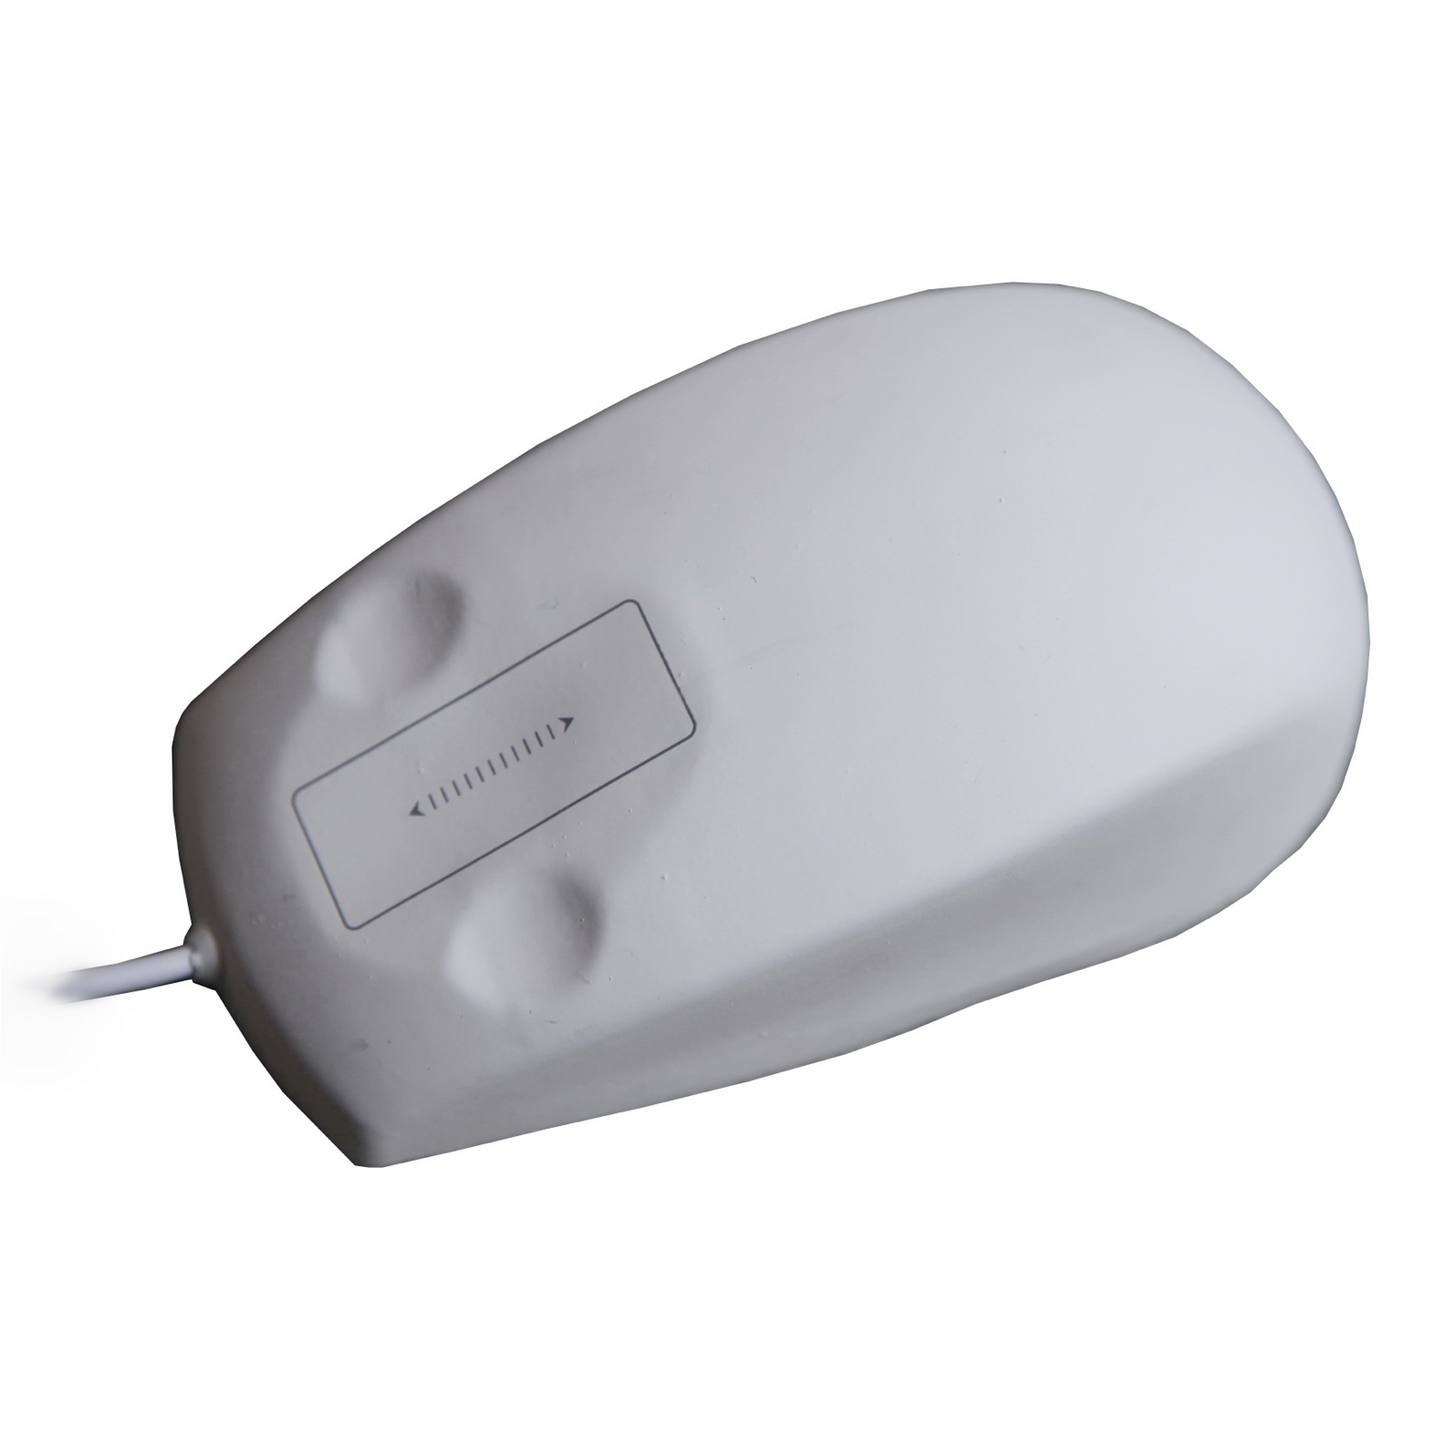 AS-M020 Waterproof Laser Mouse with Scrolling Touchpad